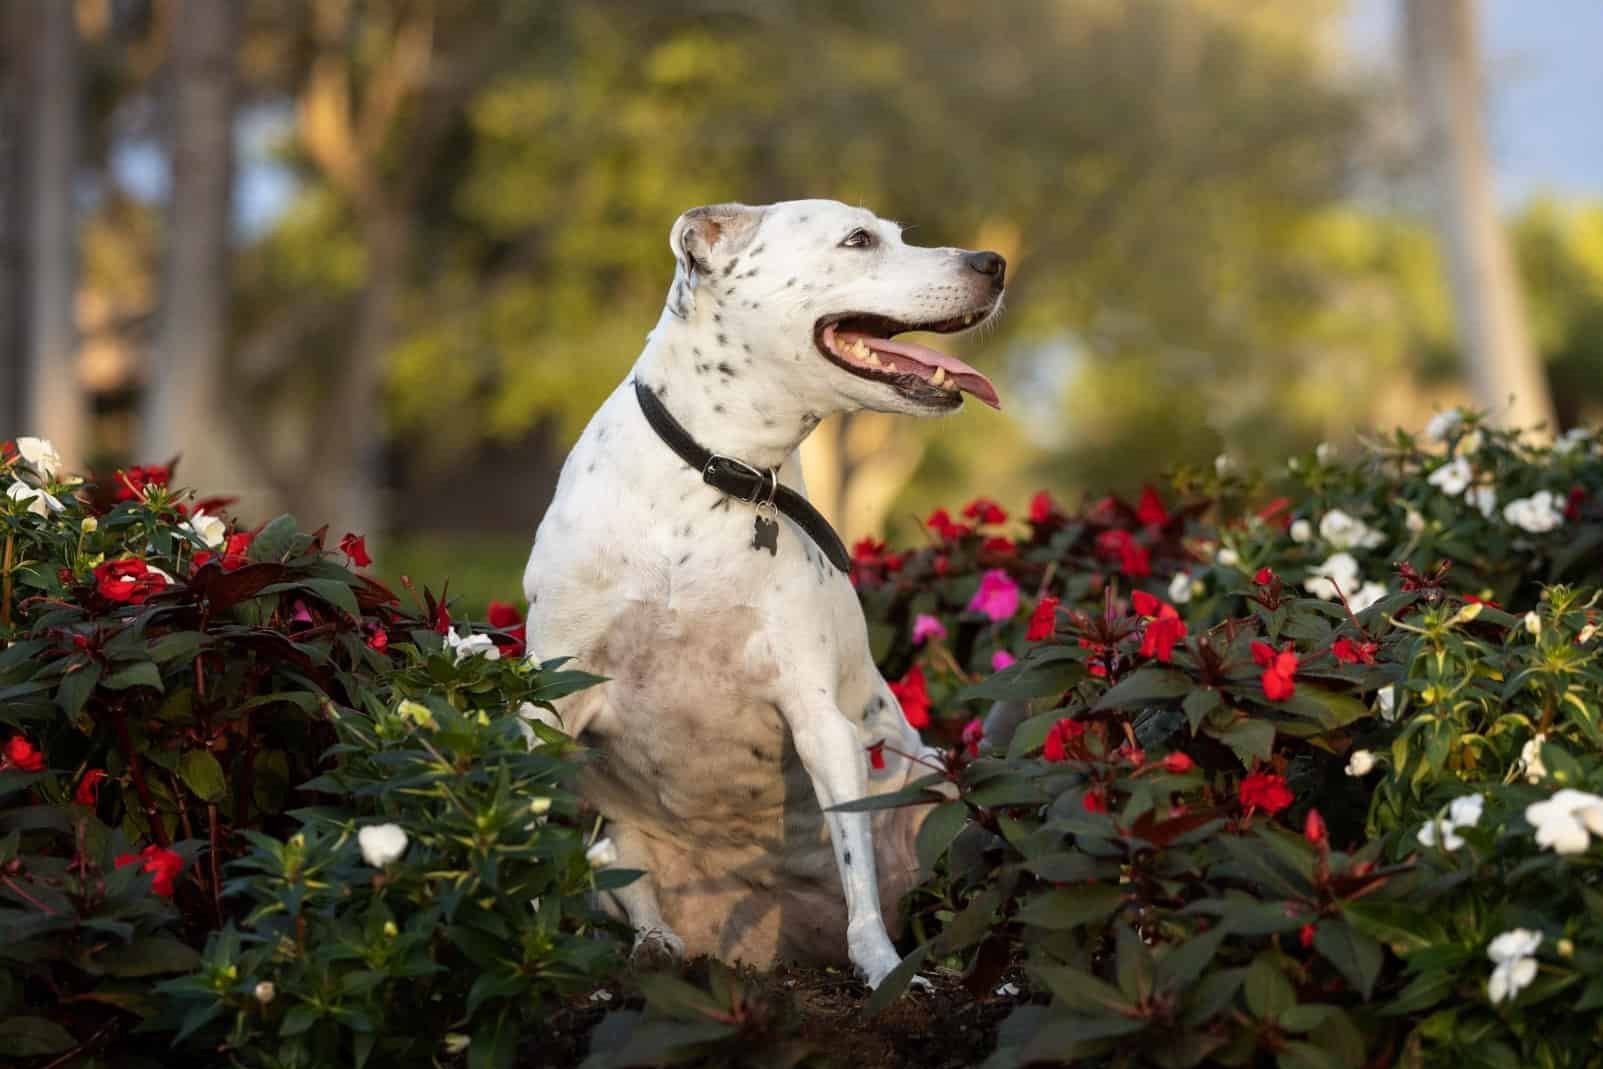 A BED OF FLOWERS FORMS A BEAUTIFUL NATURAL FRAME FOR THIS DOG